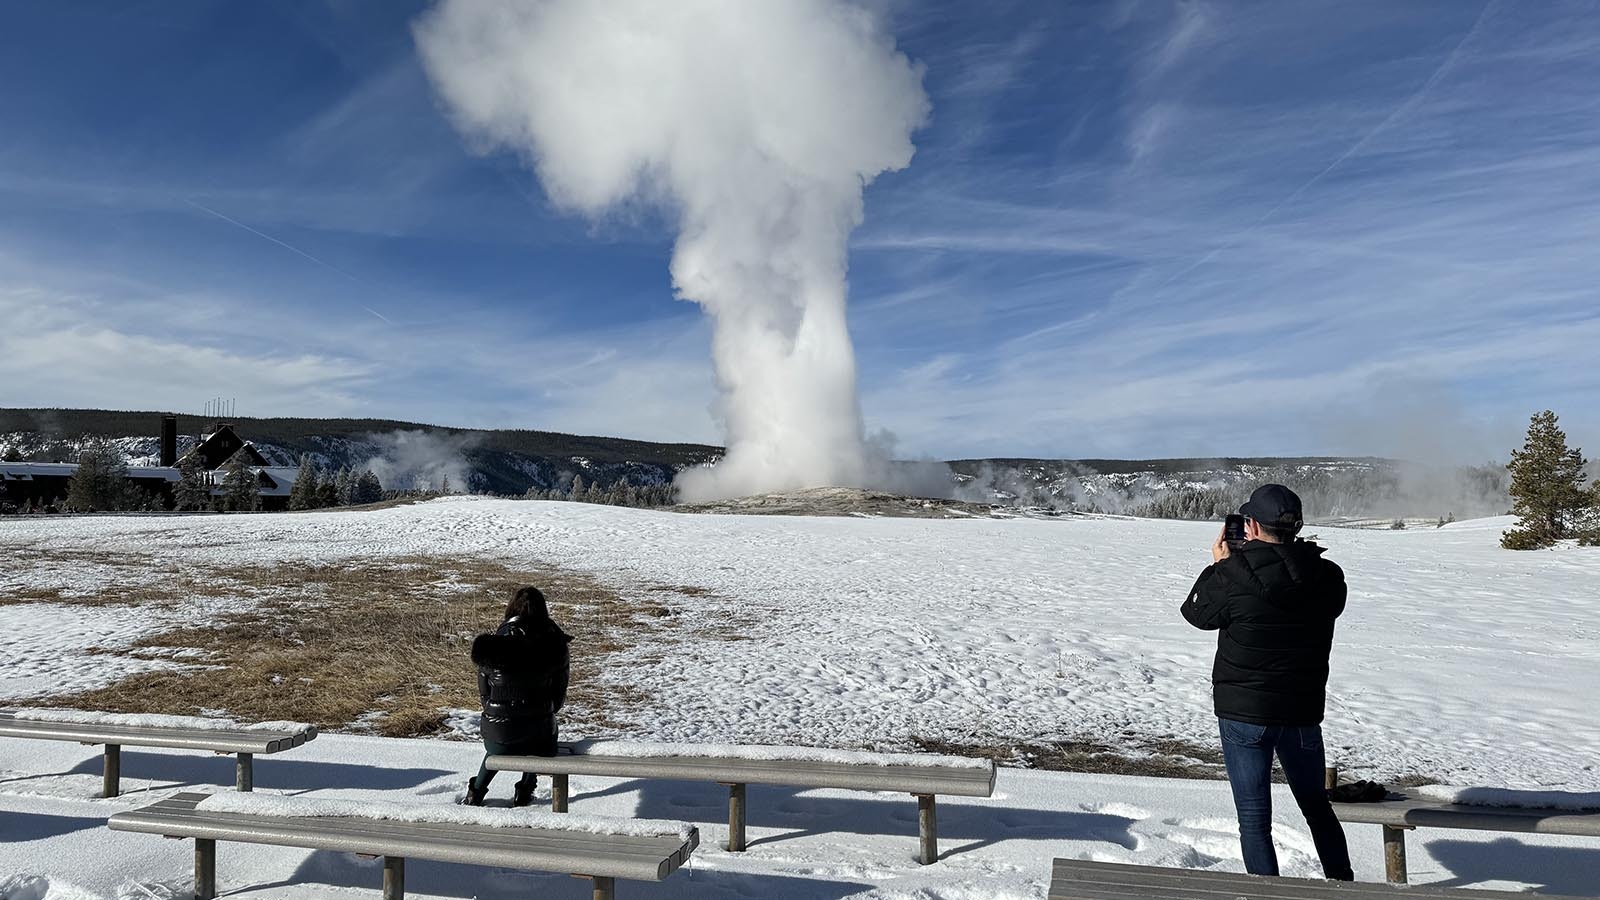 An Old Faithful eruption in mid-December. Thousands of people might be present during a single summer eruption, but only a few hundred will see a day's worth of eruptions in winter.